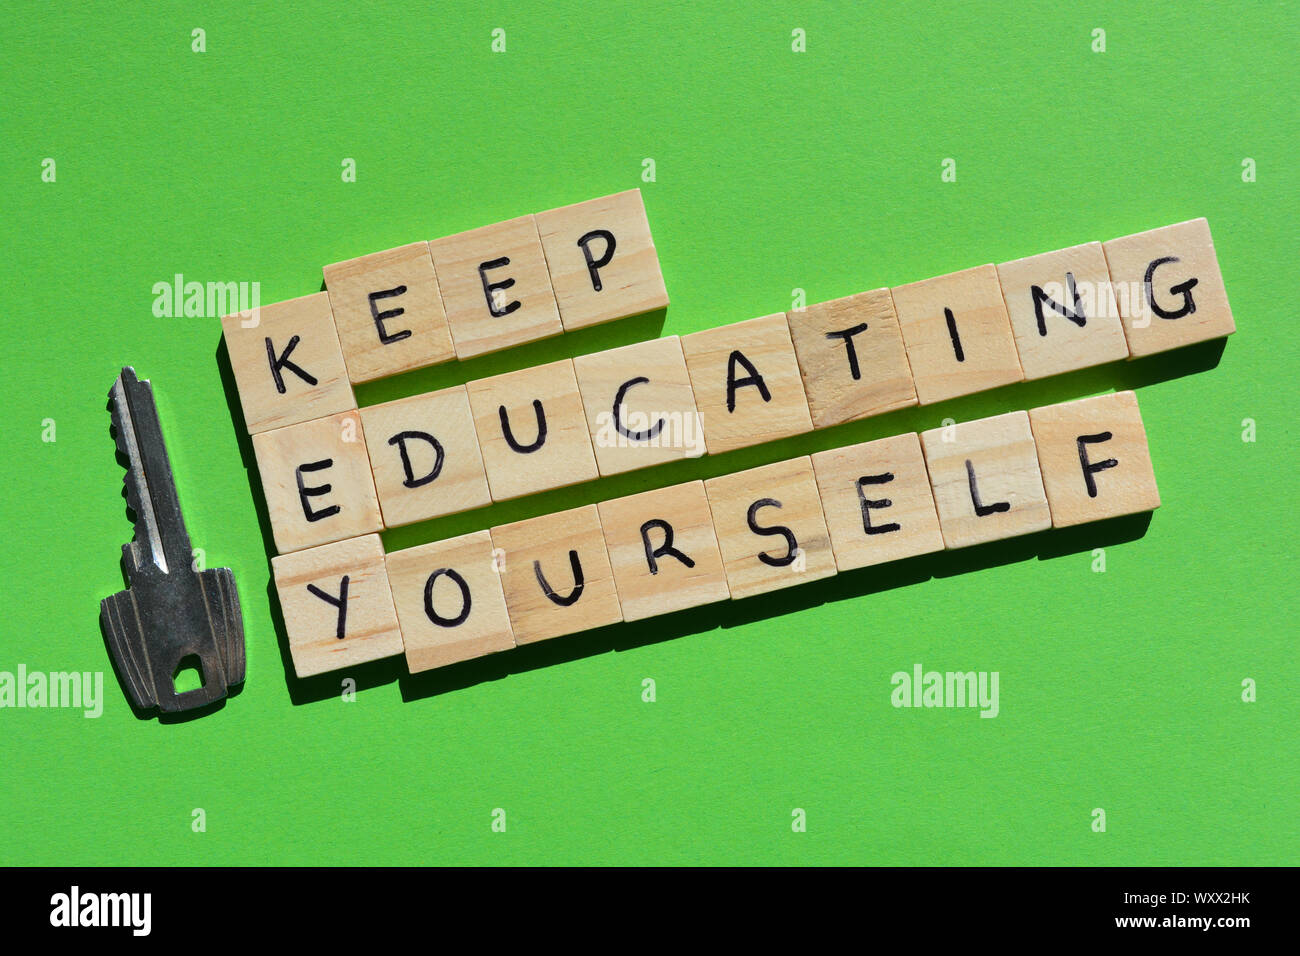 Keep Educating Yourself. Motivational words, using the acronym KEY. Wooden alphabet letters next to a metal key on a green  background Stock Photo